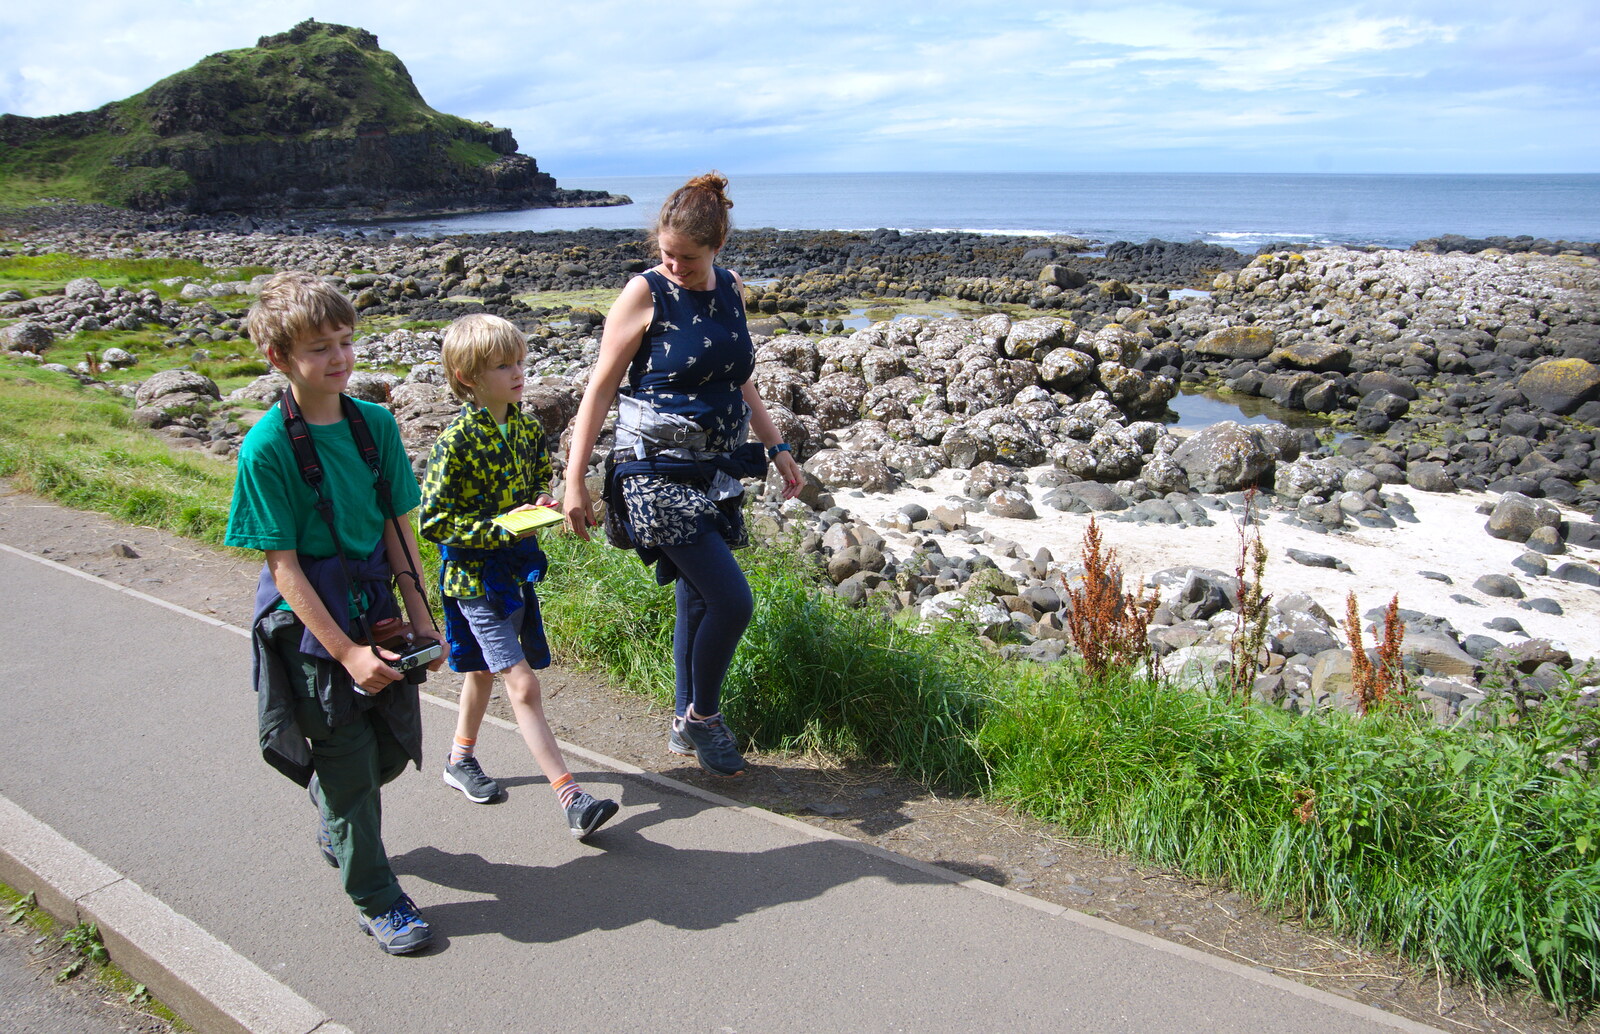 Fred, Harry and Isobel march along the road from The Giant's Causeway, Bushmills, County Antrim, Northern Ireland - 14th August 2019